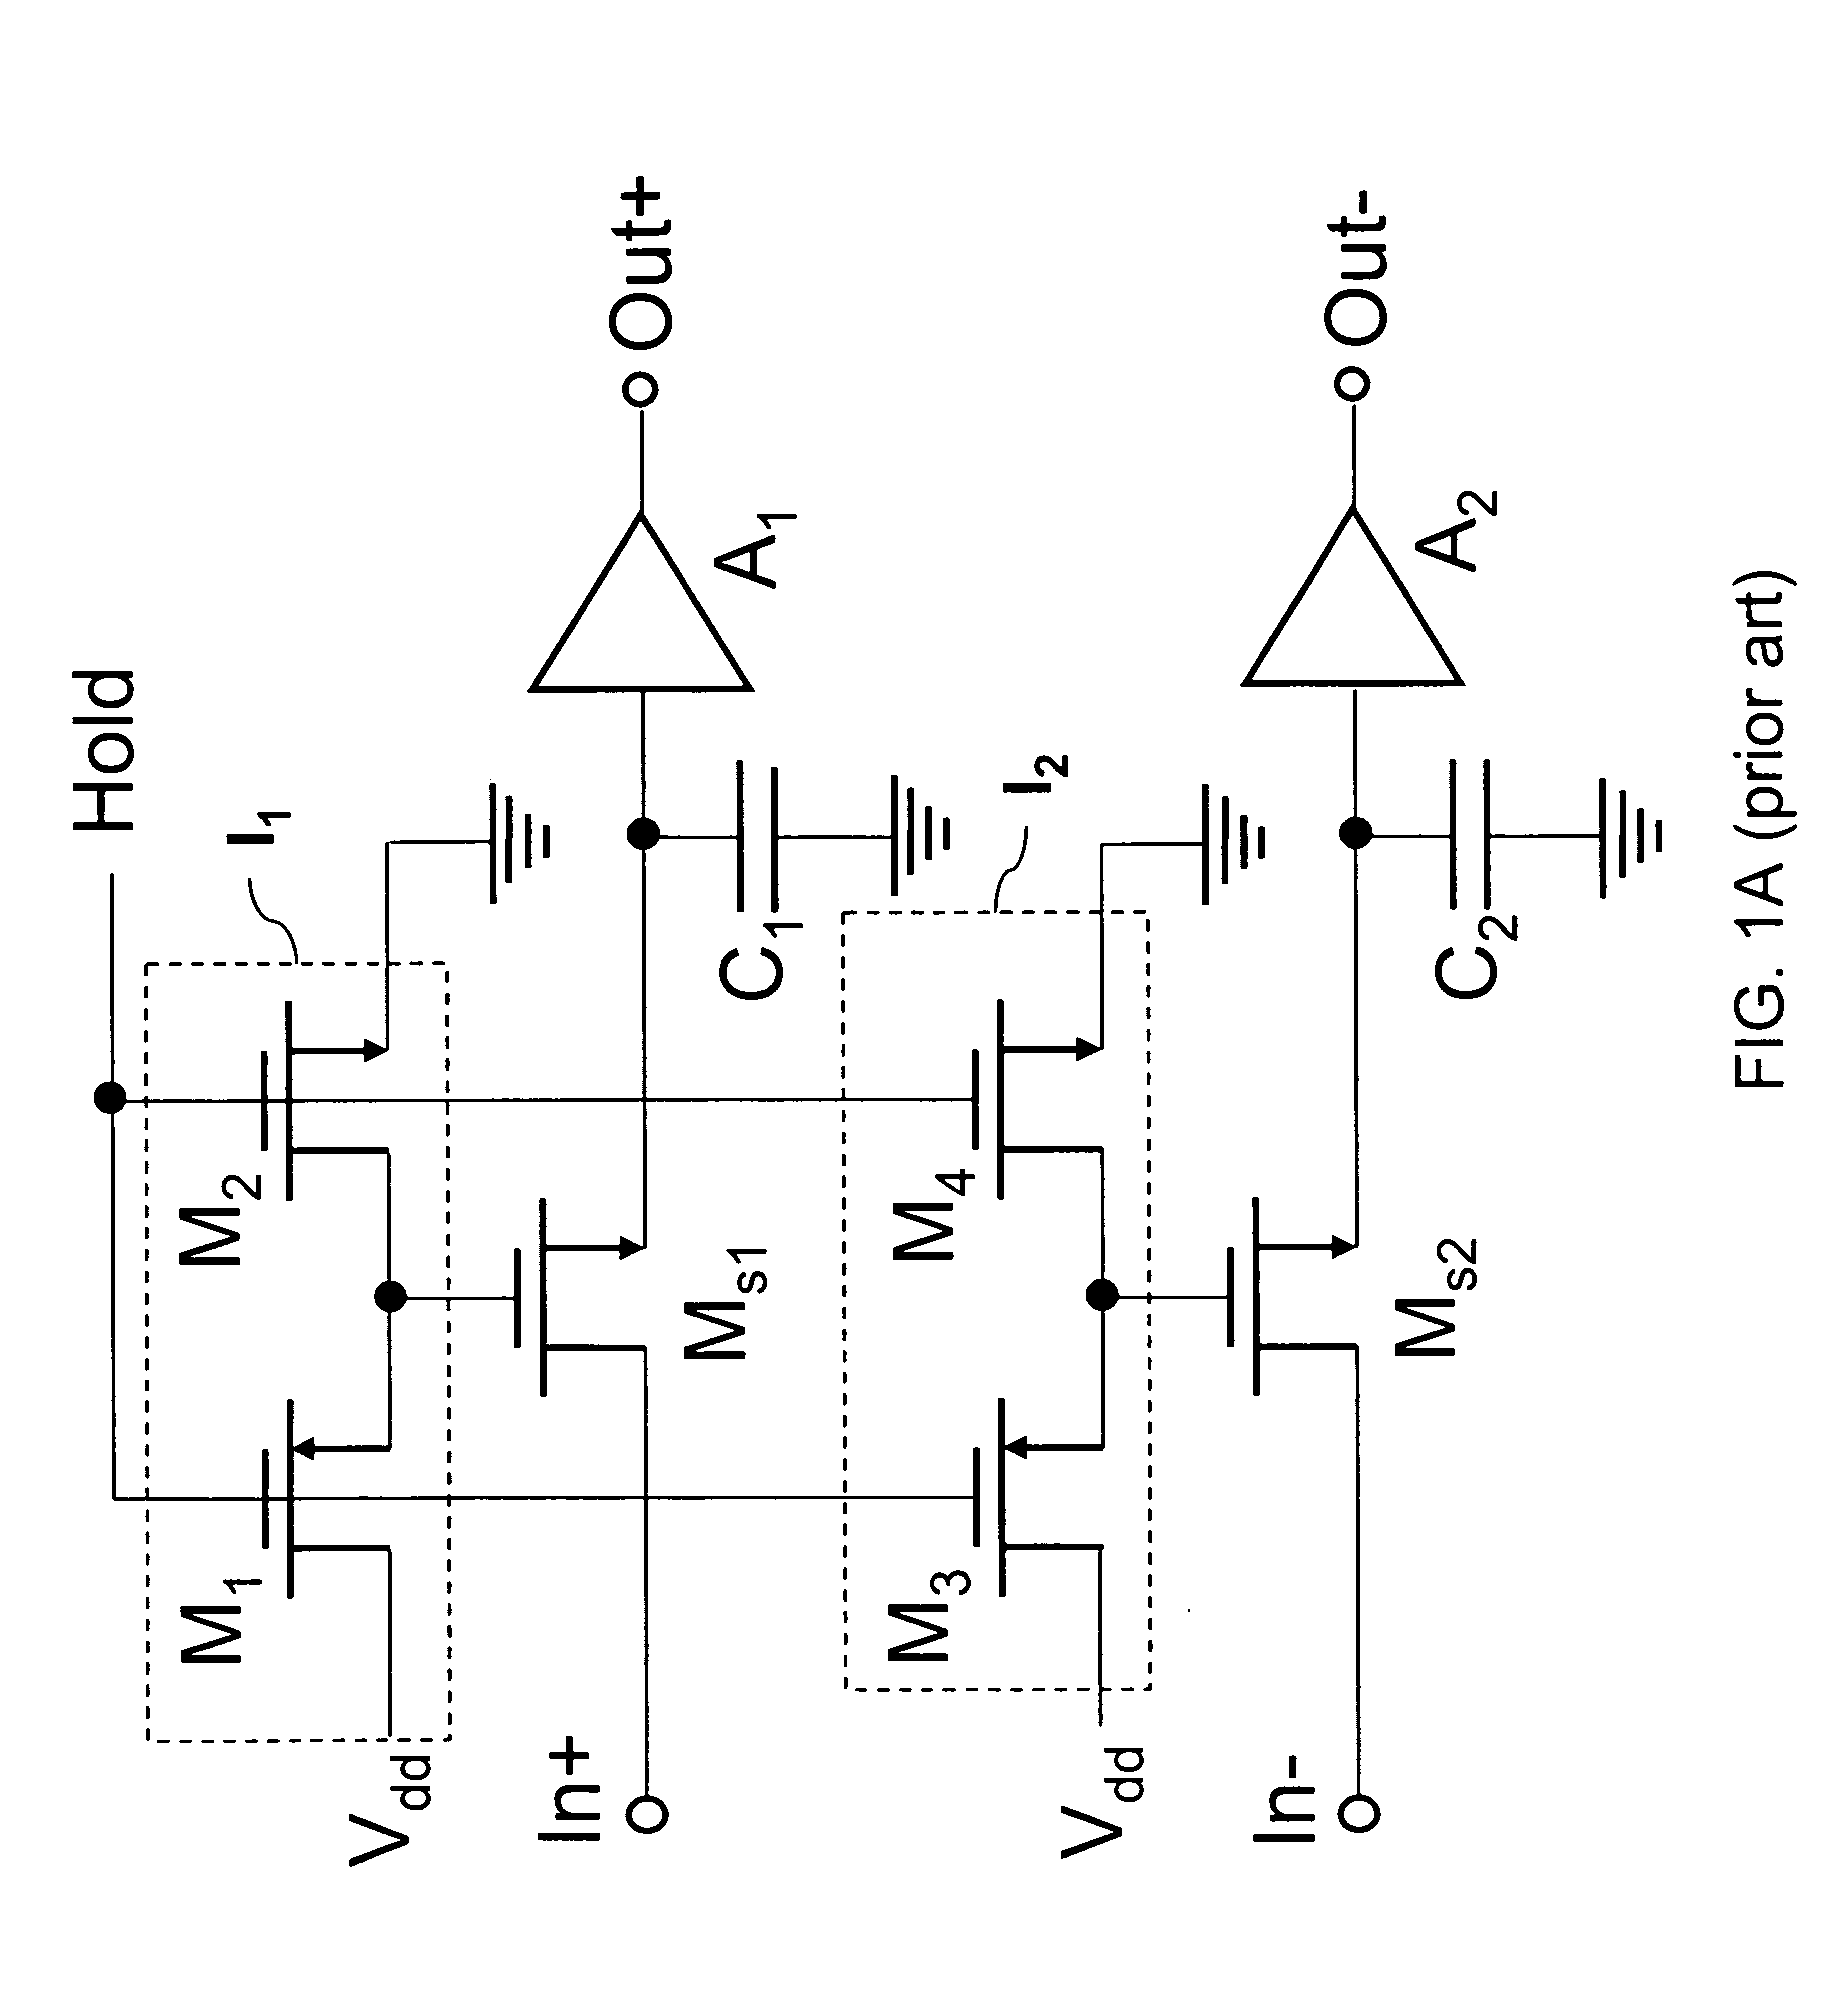 Switch linearized track and hold circuit for switch linearization